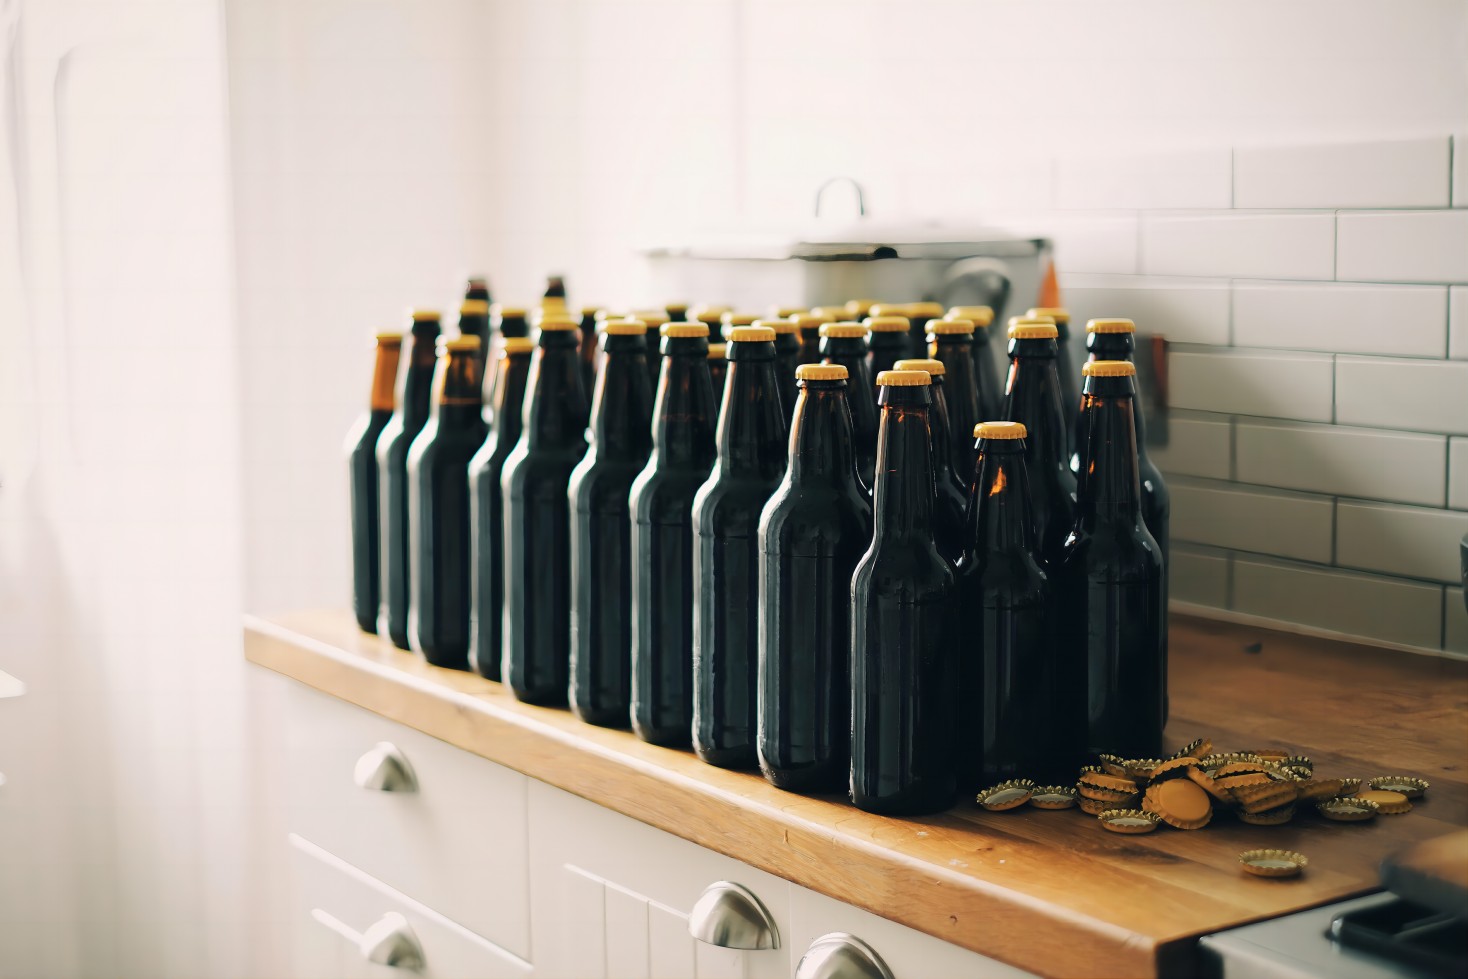 WHAT SHOULD WE PAY ATTENTION TO WHEN WE CHOOSE THE HOSES FOR THE BREWING INDUSTRY?